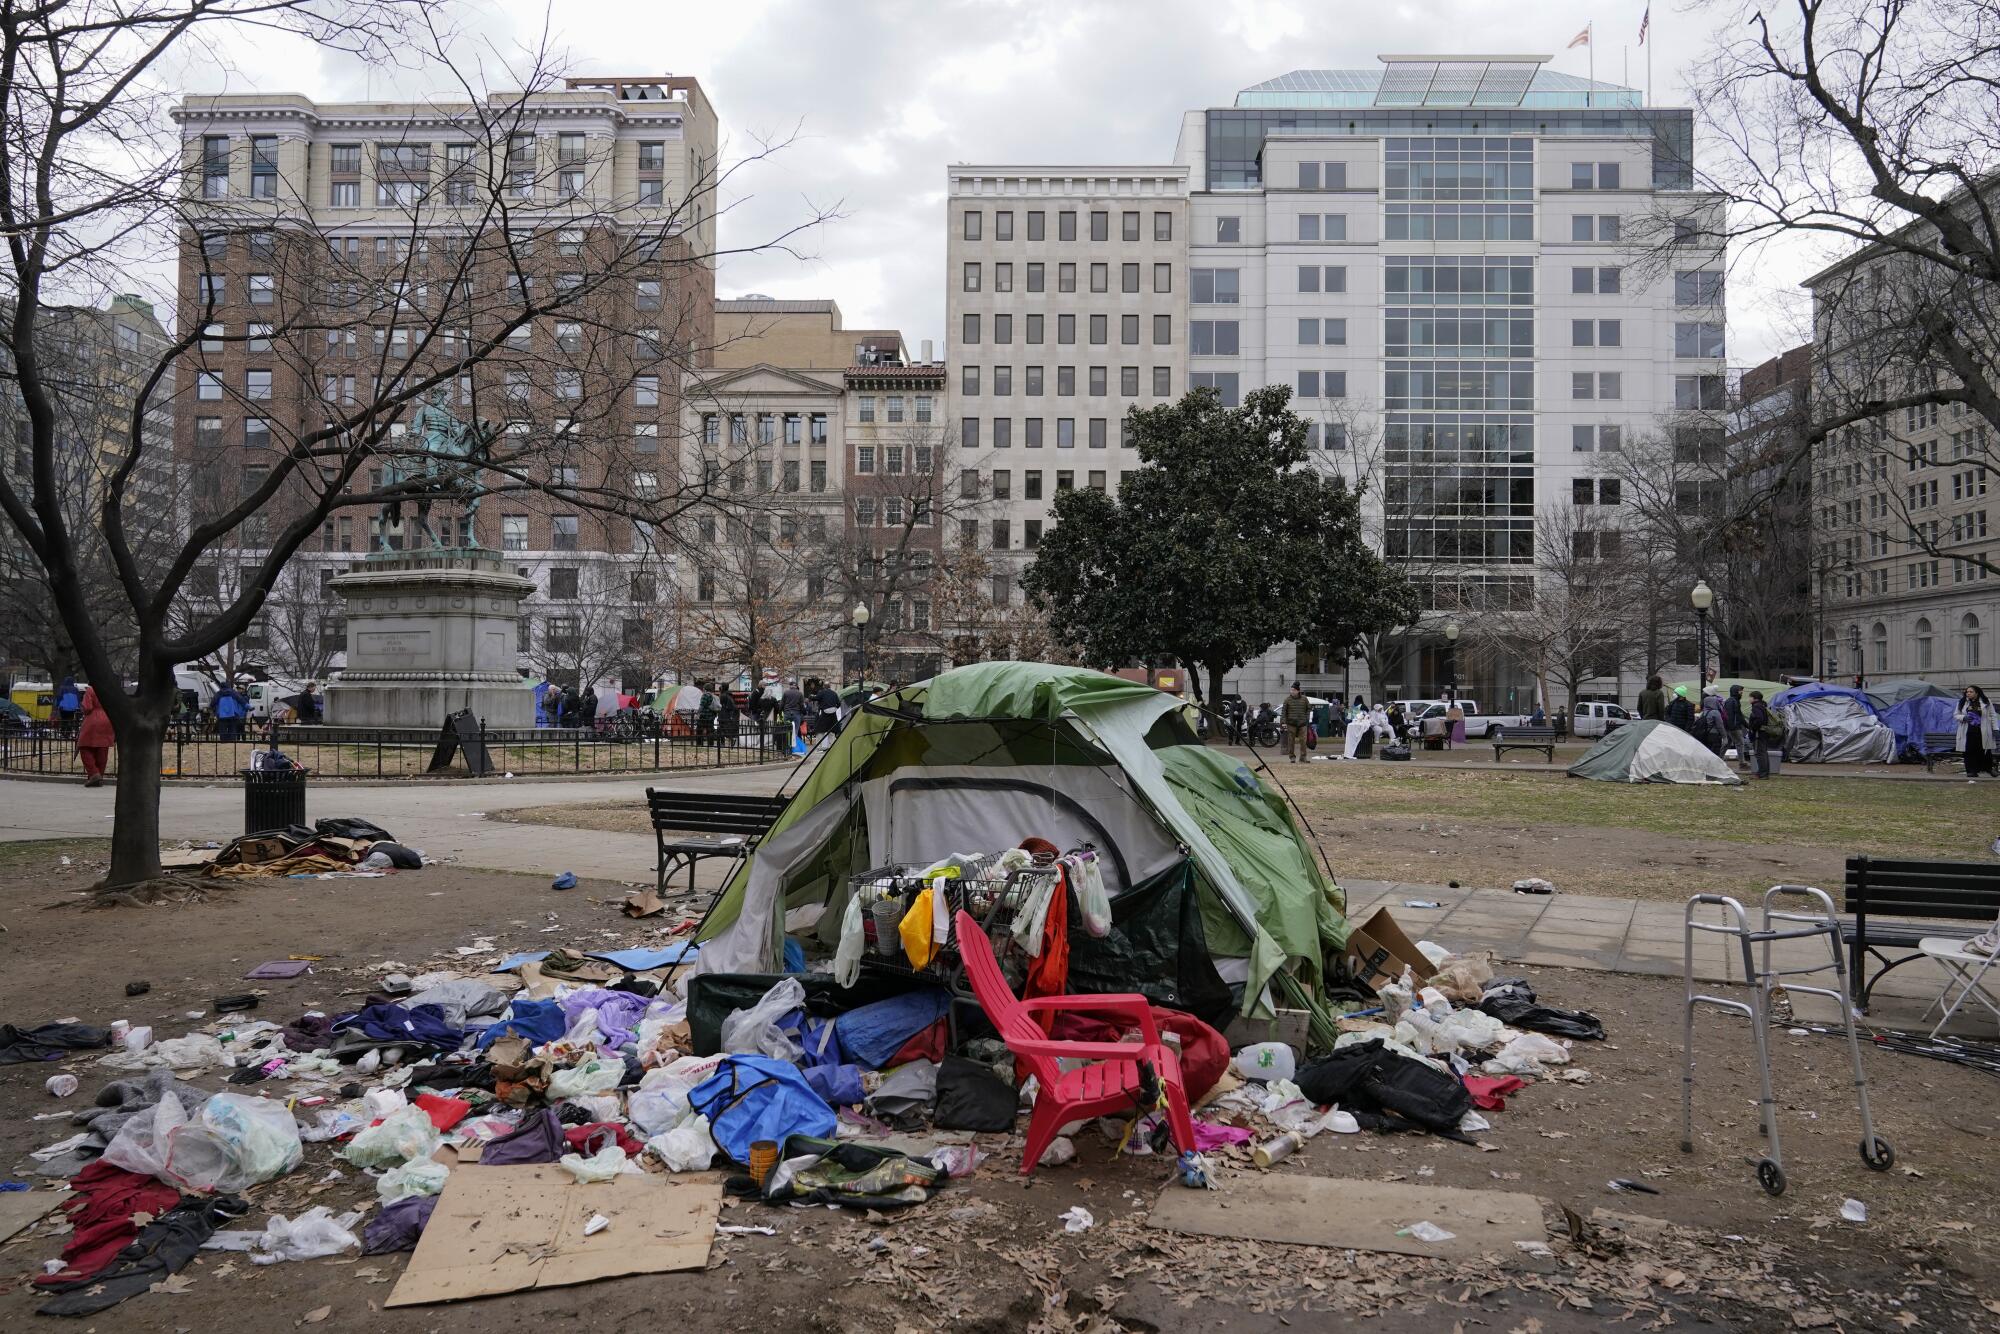 A tent and debris in McPherson Square in Washington, D.C.